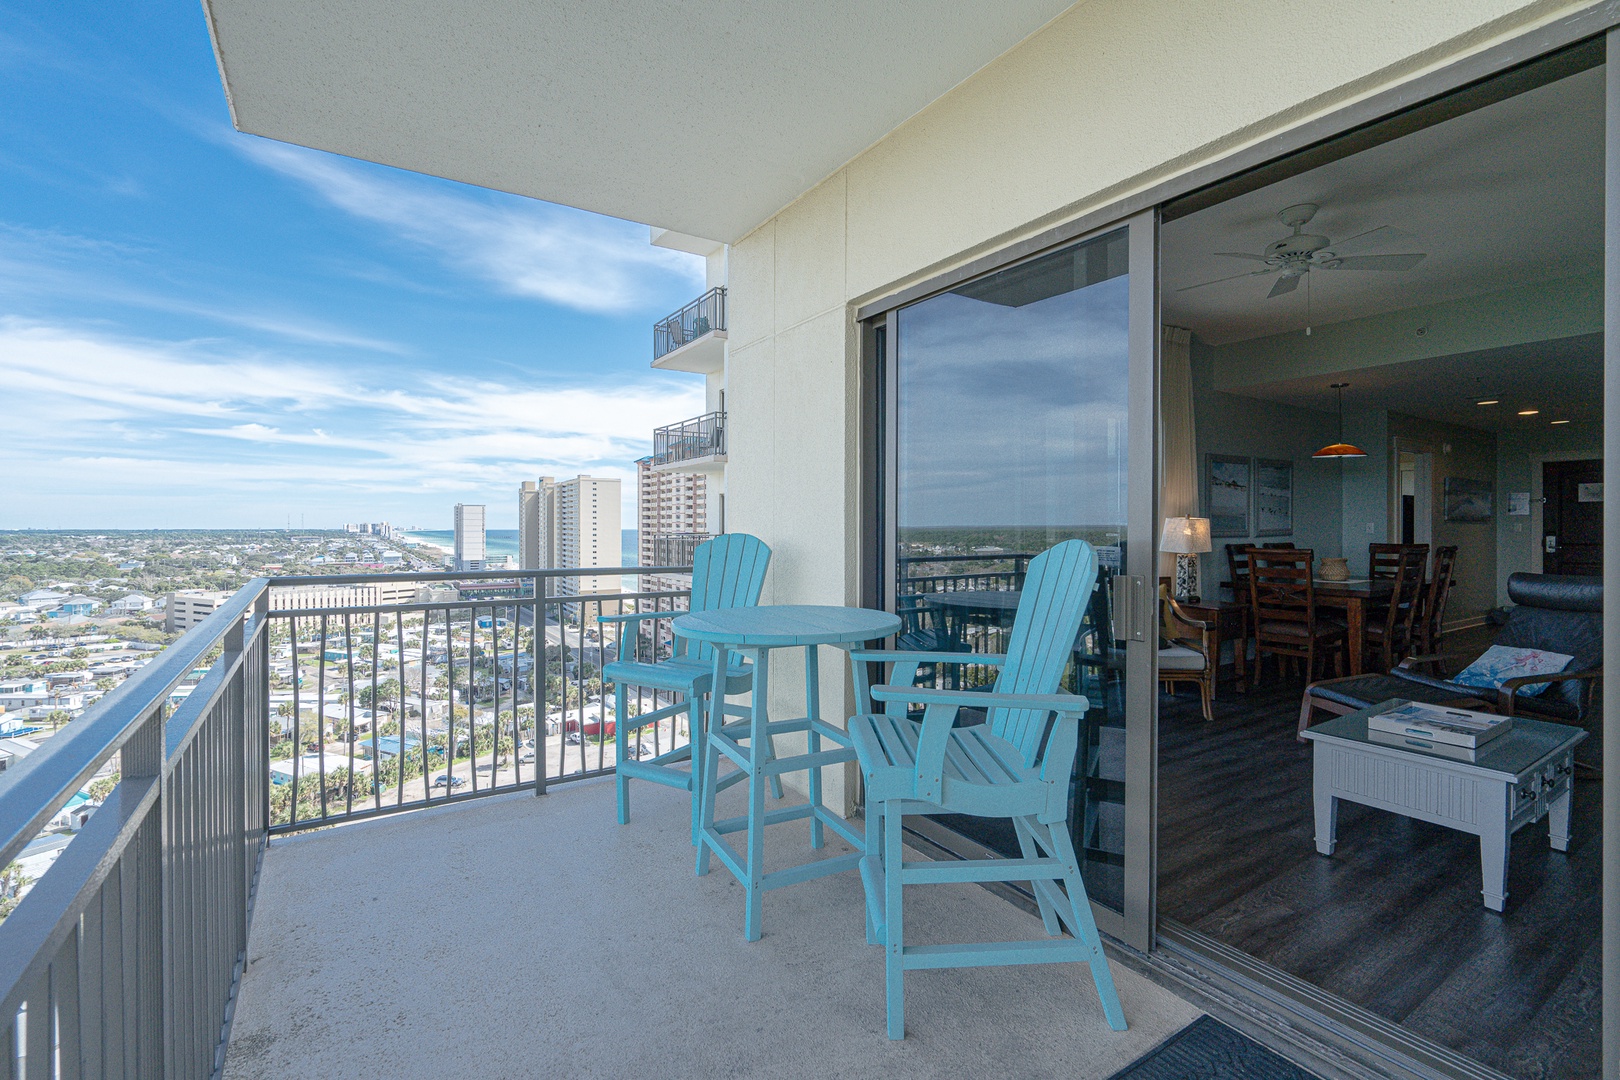 Sip your coffee or a drink in the fresh air with stunning balcony views